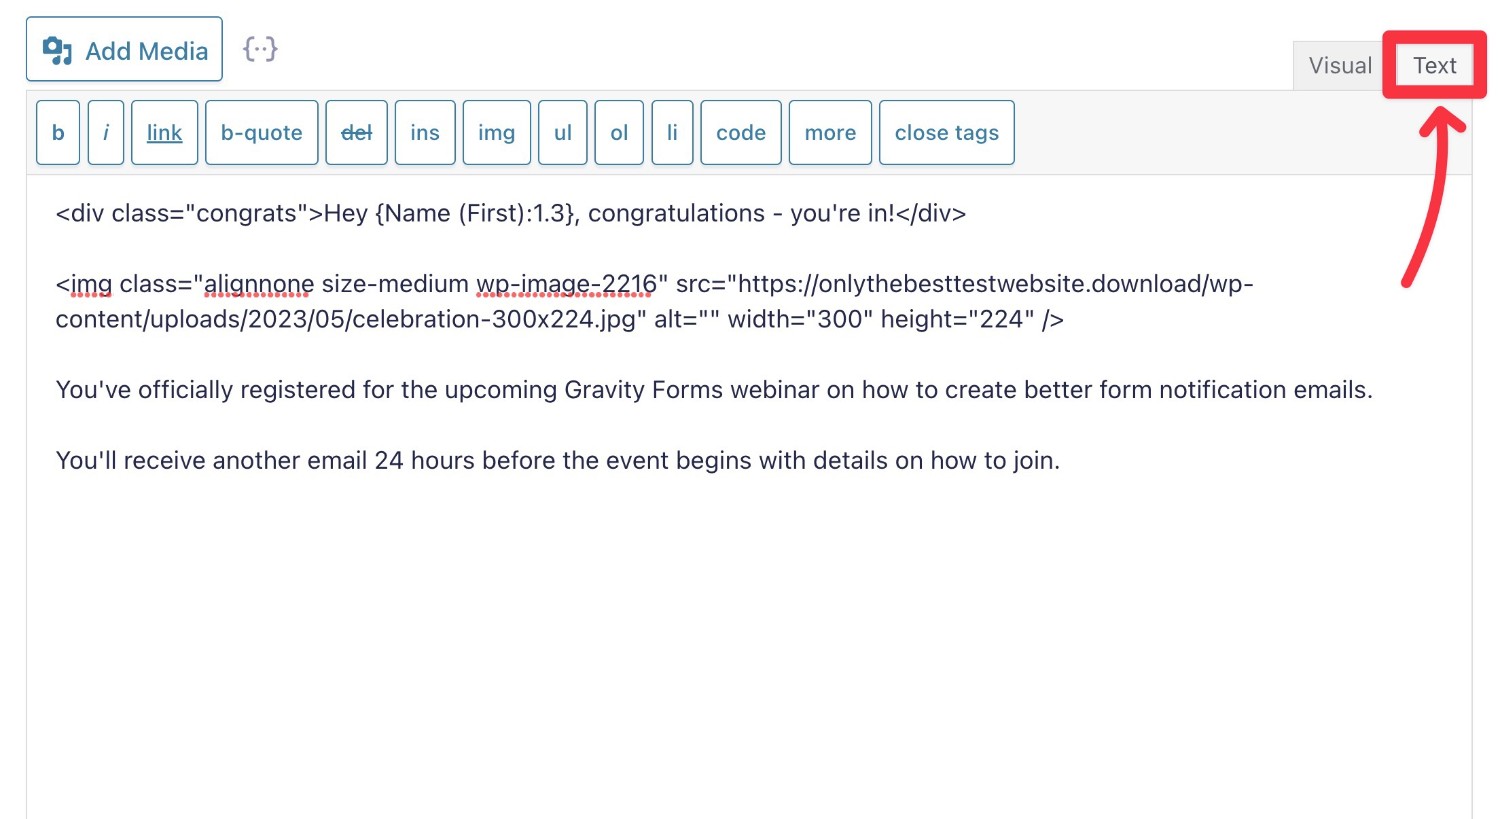 How to customize emails using HTML